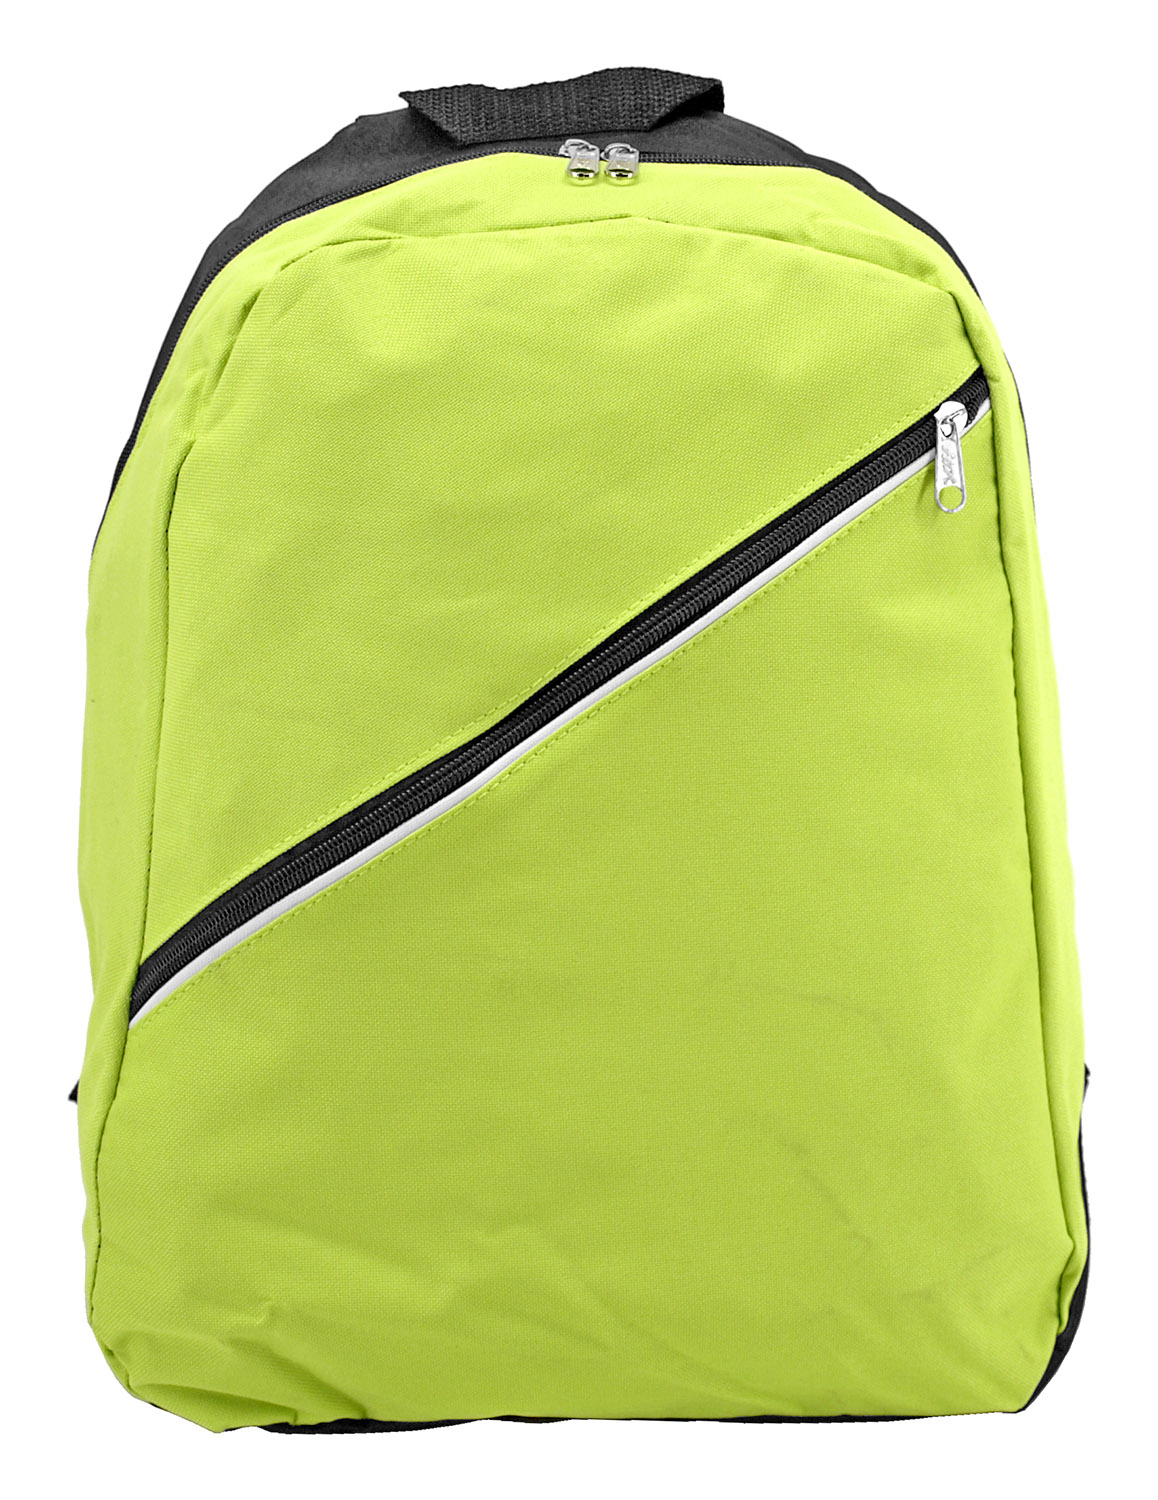 Back to School Backpack - Neon Green